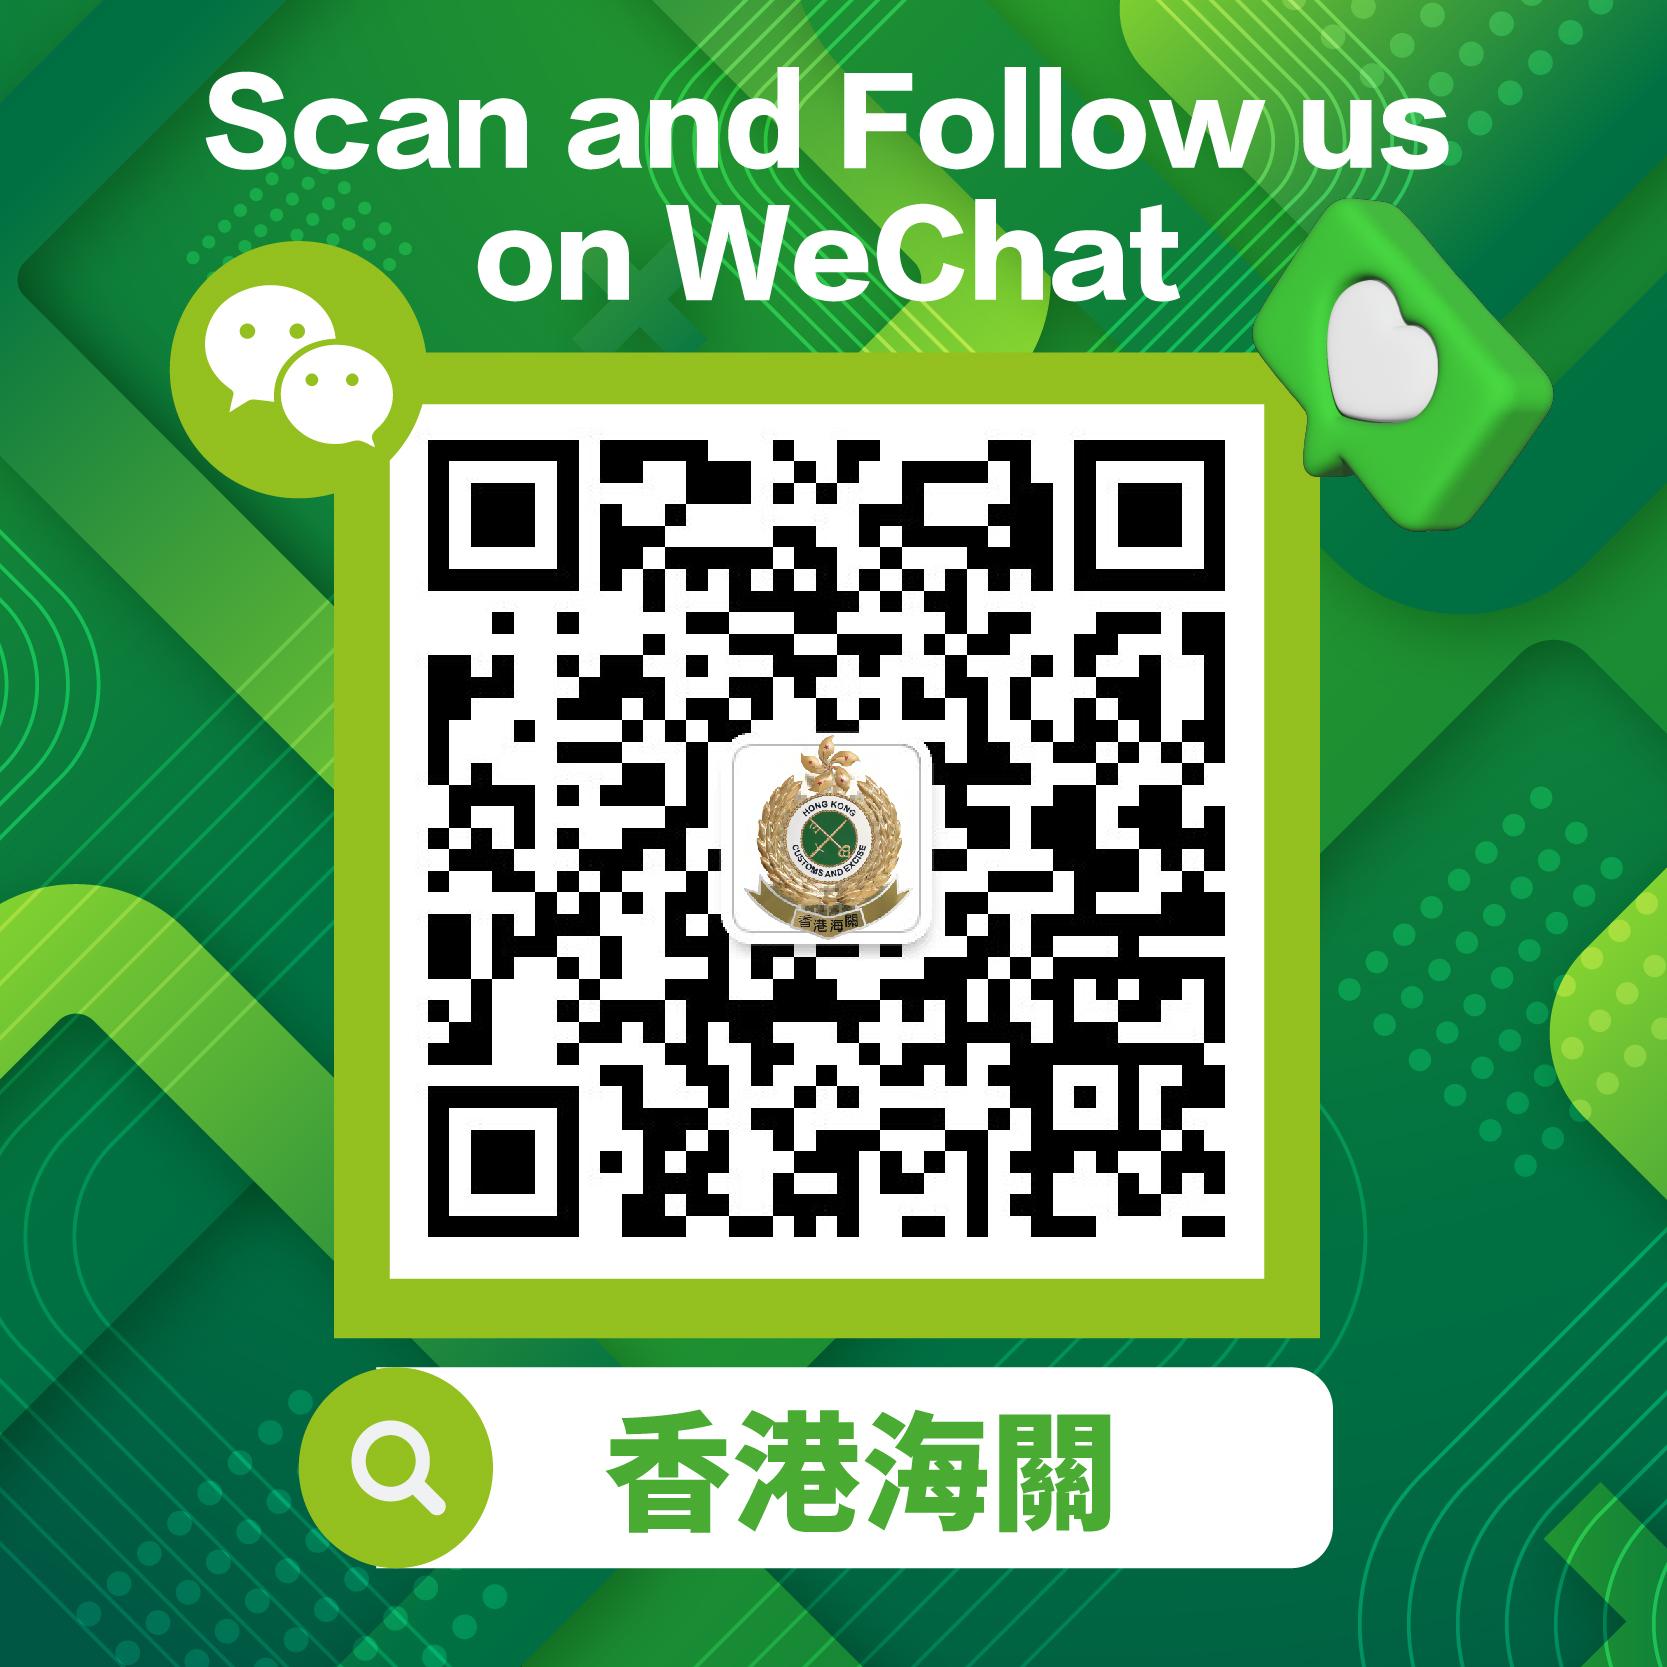 Hong Kong Customs launched its WeChat official account today (July 1). Photo shows the QR code of Hong Kong Customs' WeChat official account.